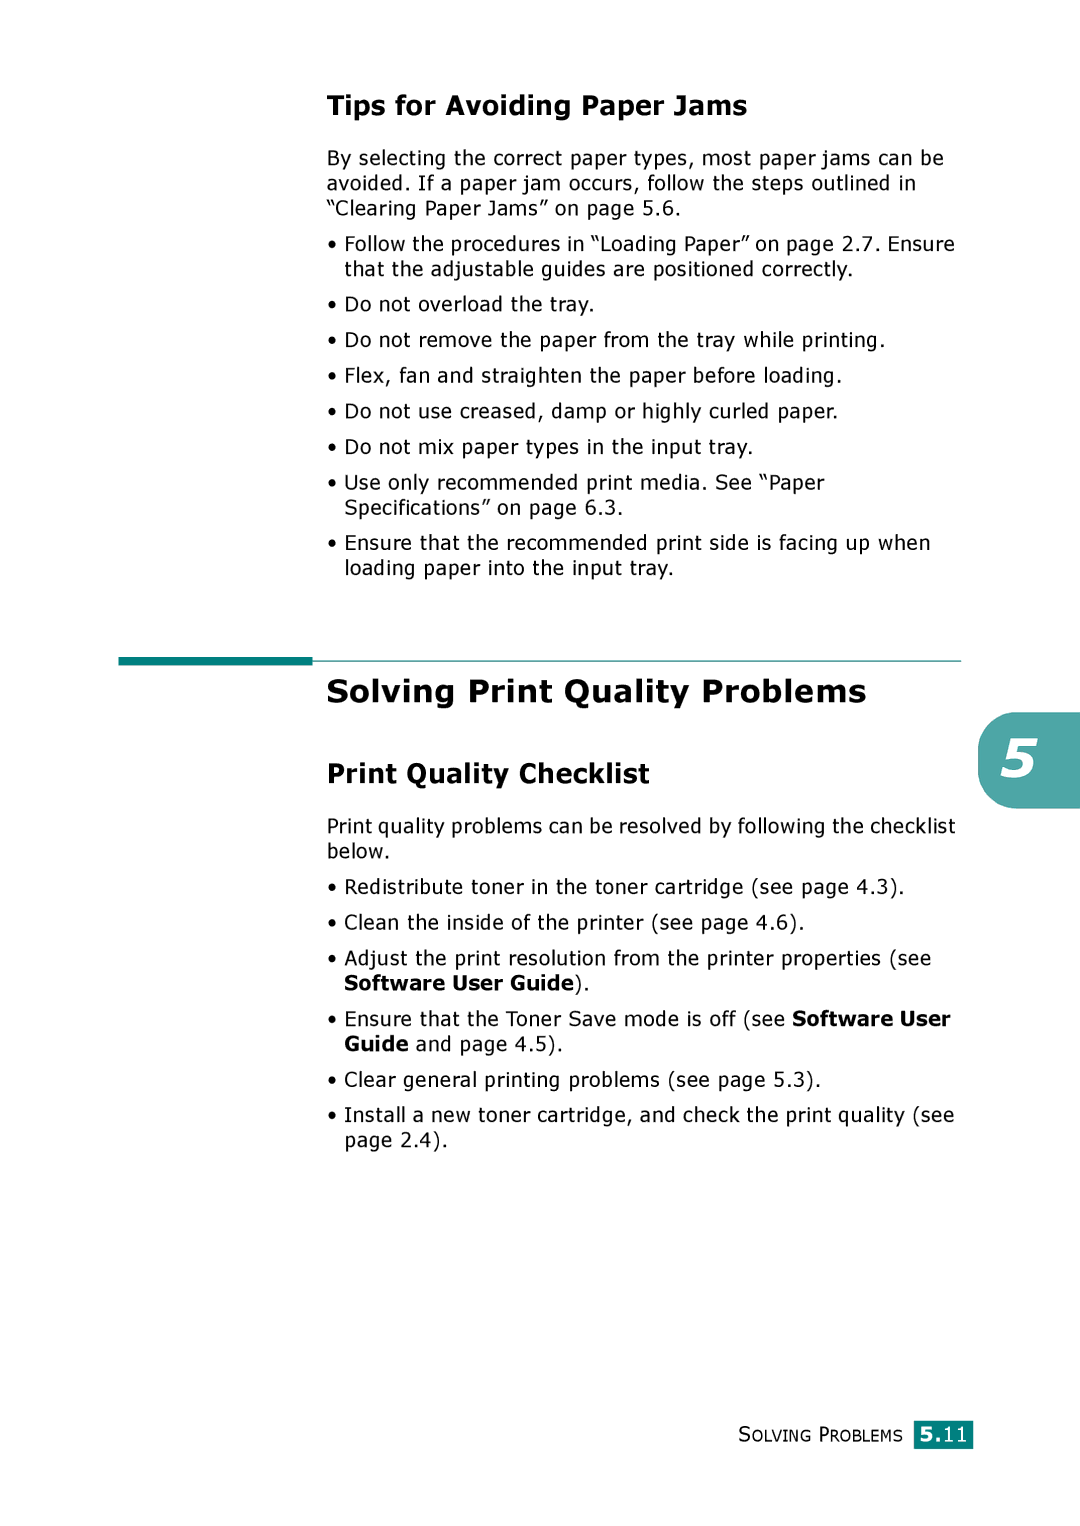 Xerox 3117 manual Solving Print Quality Problems, Tips for Avoiding Paper Jams, Print Quality Checklist 